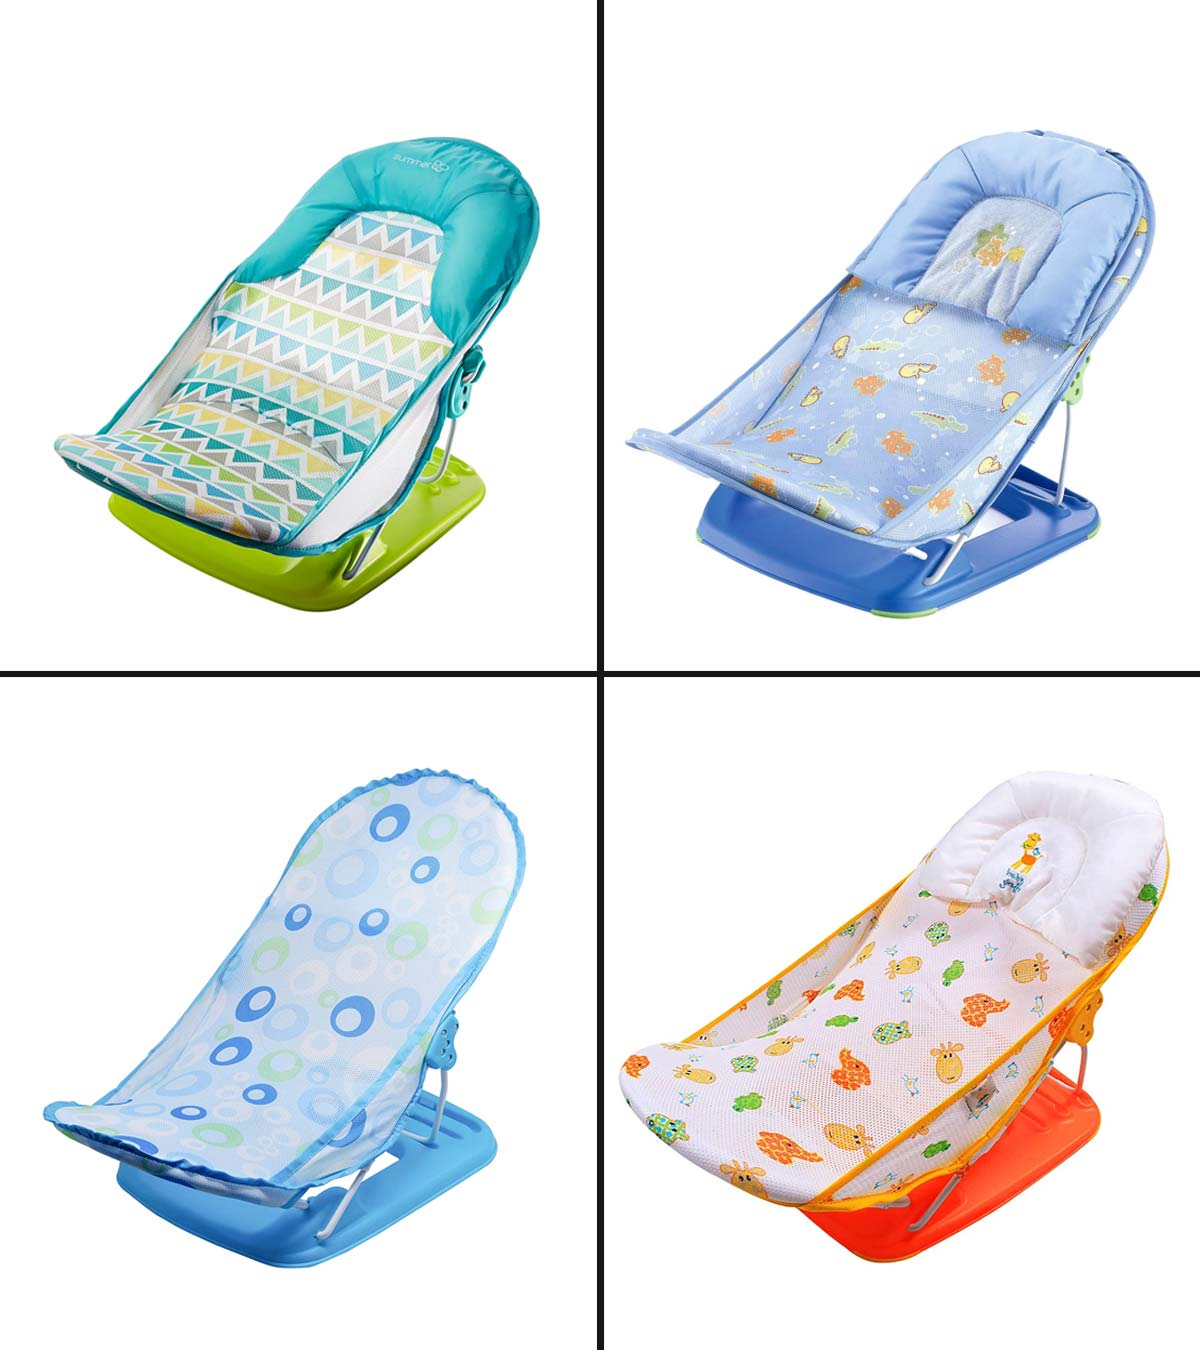 11 Best Baby Bath Seats In India of 2022